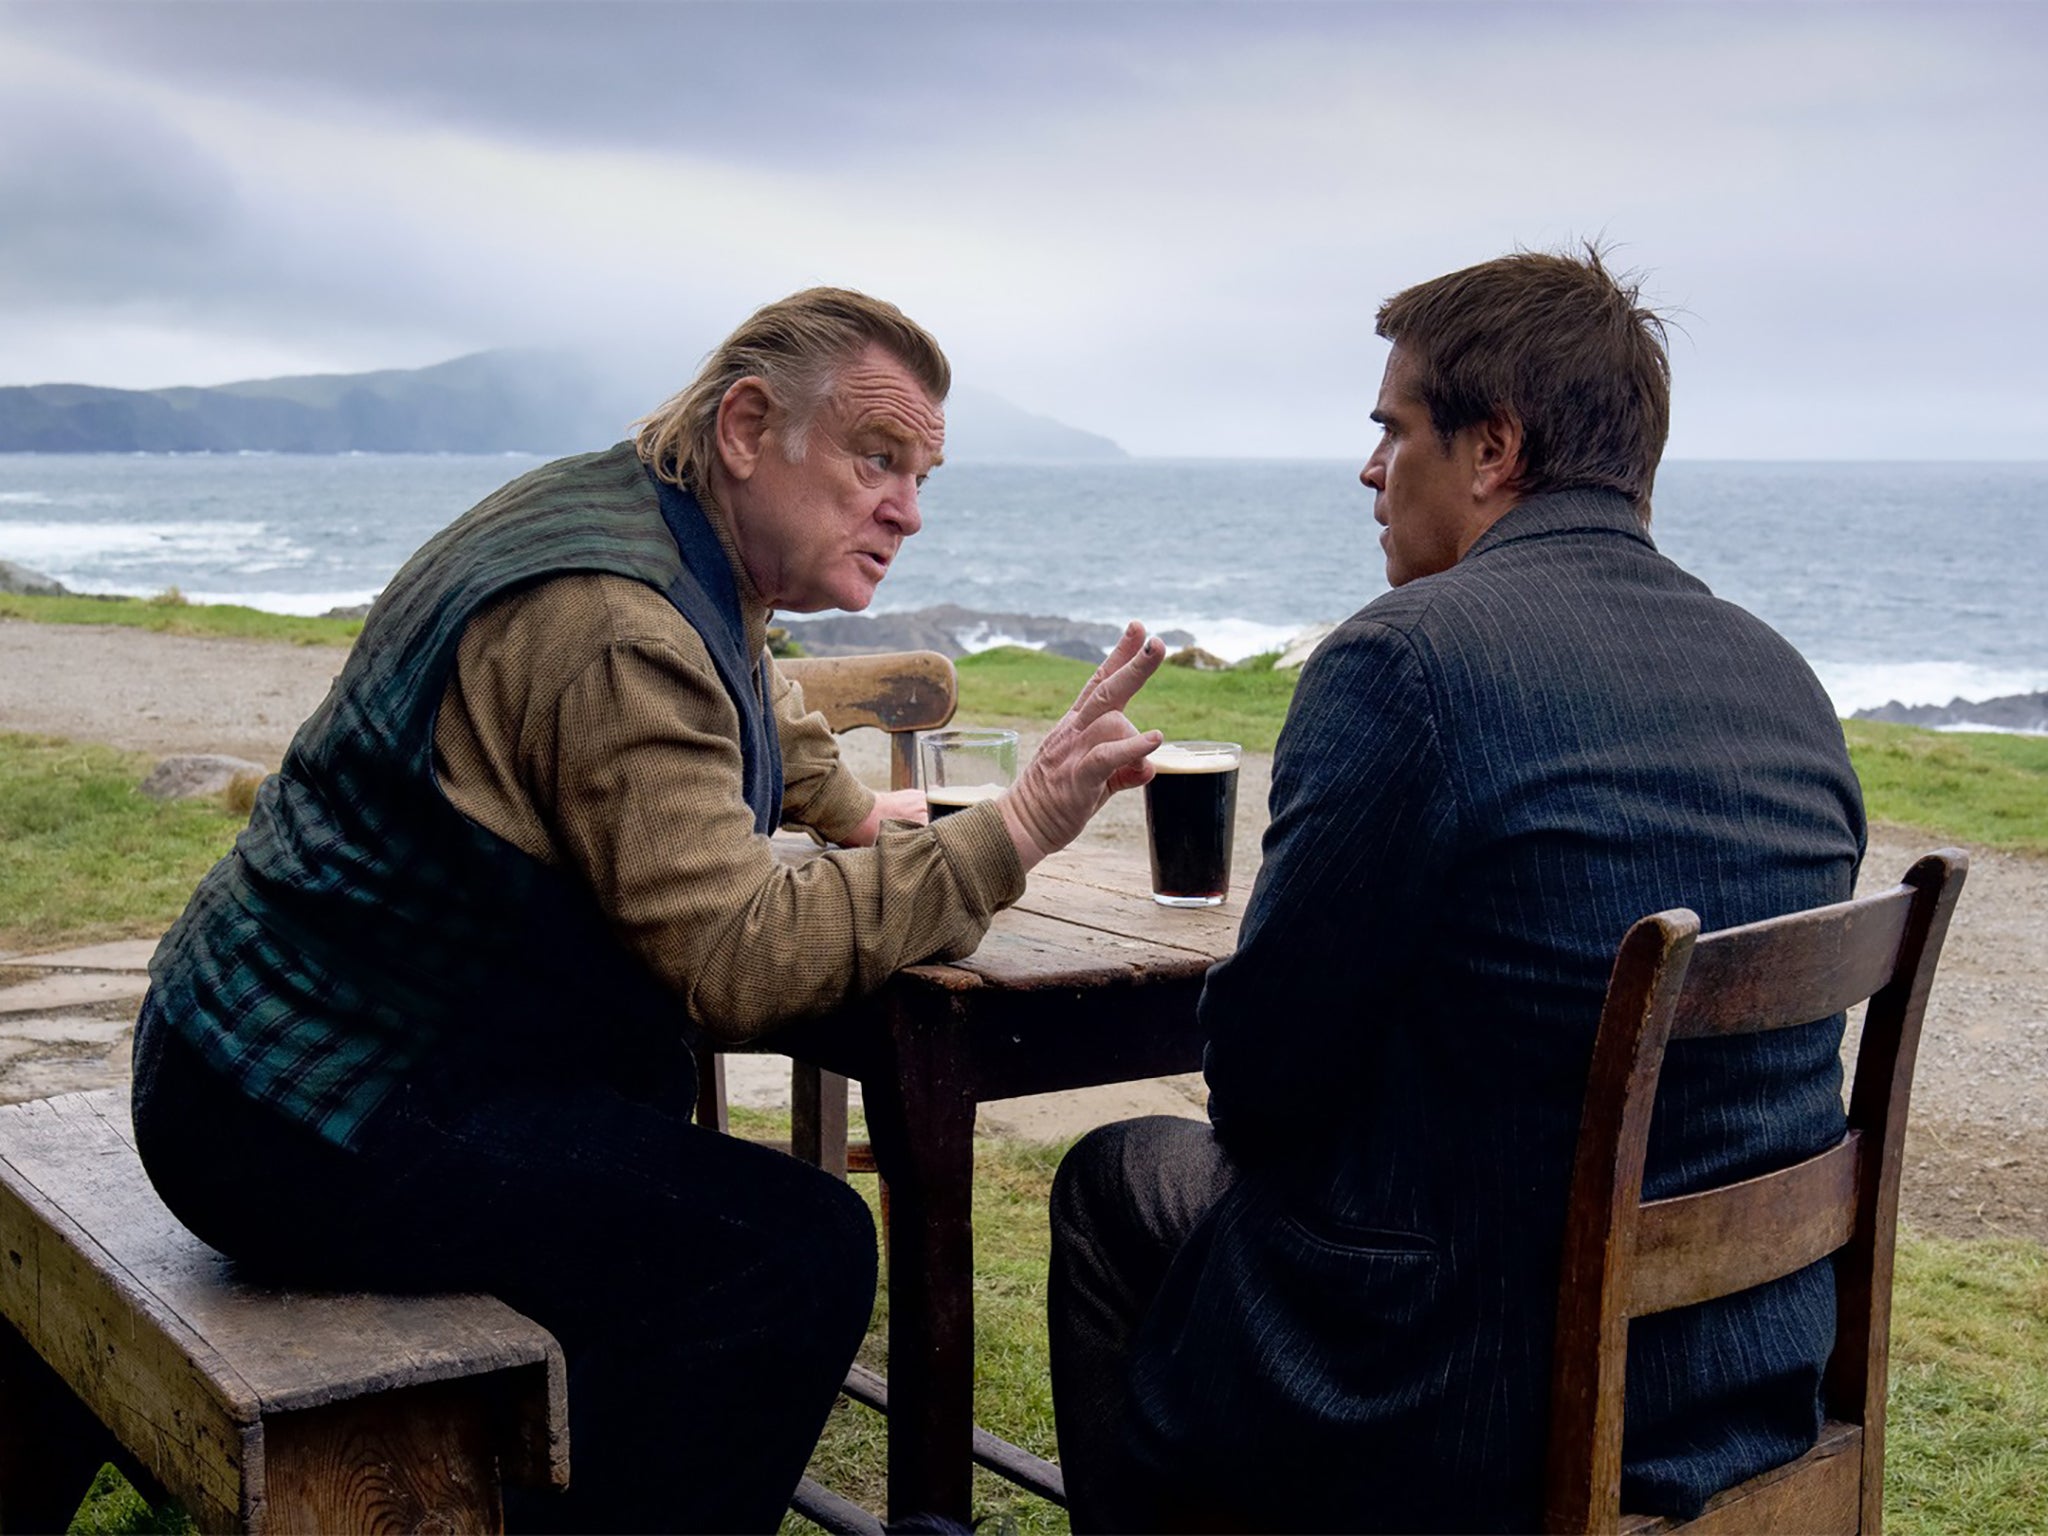 Brendan Gleeson and Colin Farrell in ‘The Banshees of Inisherin’